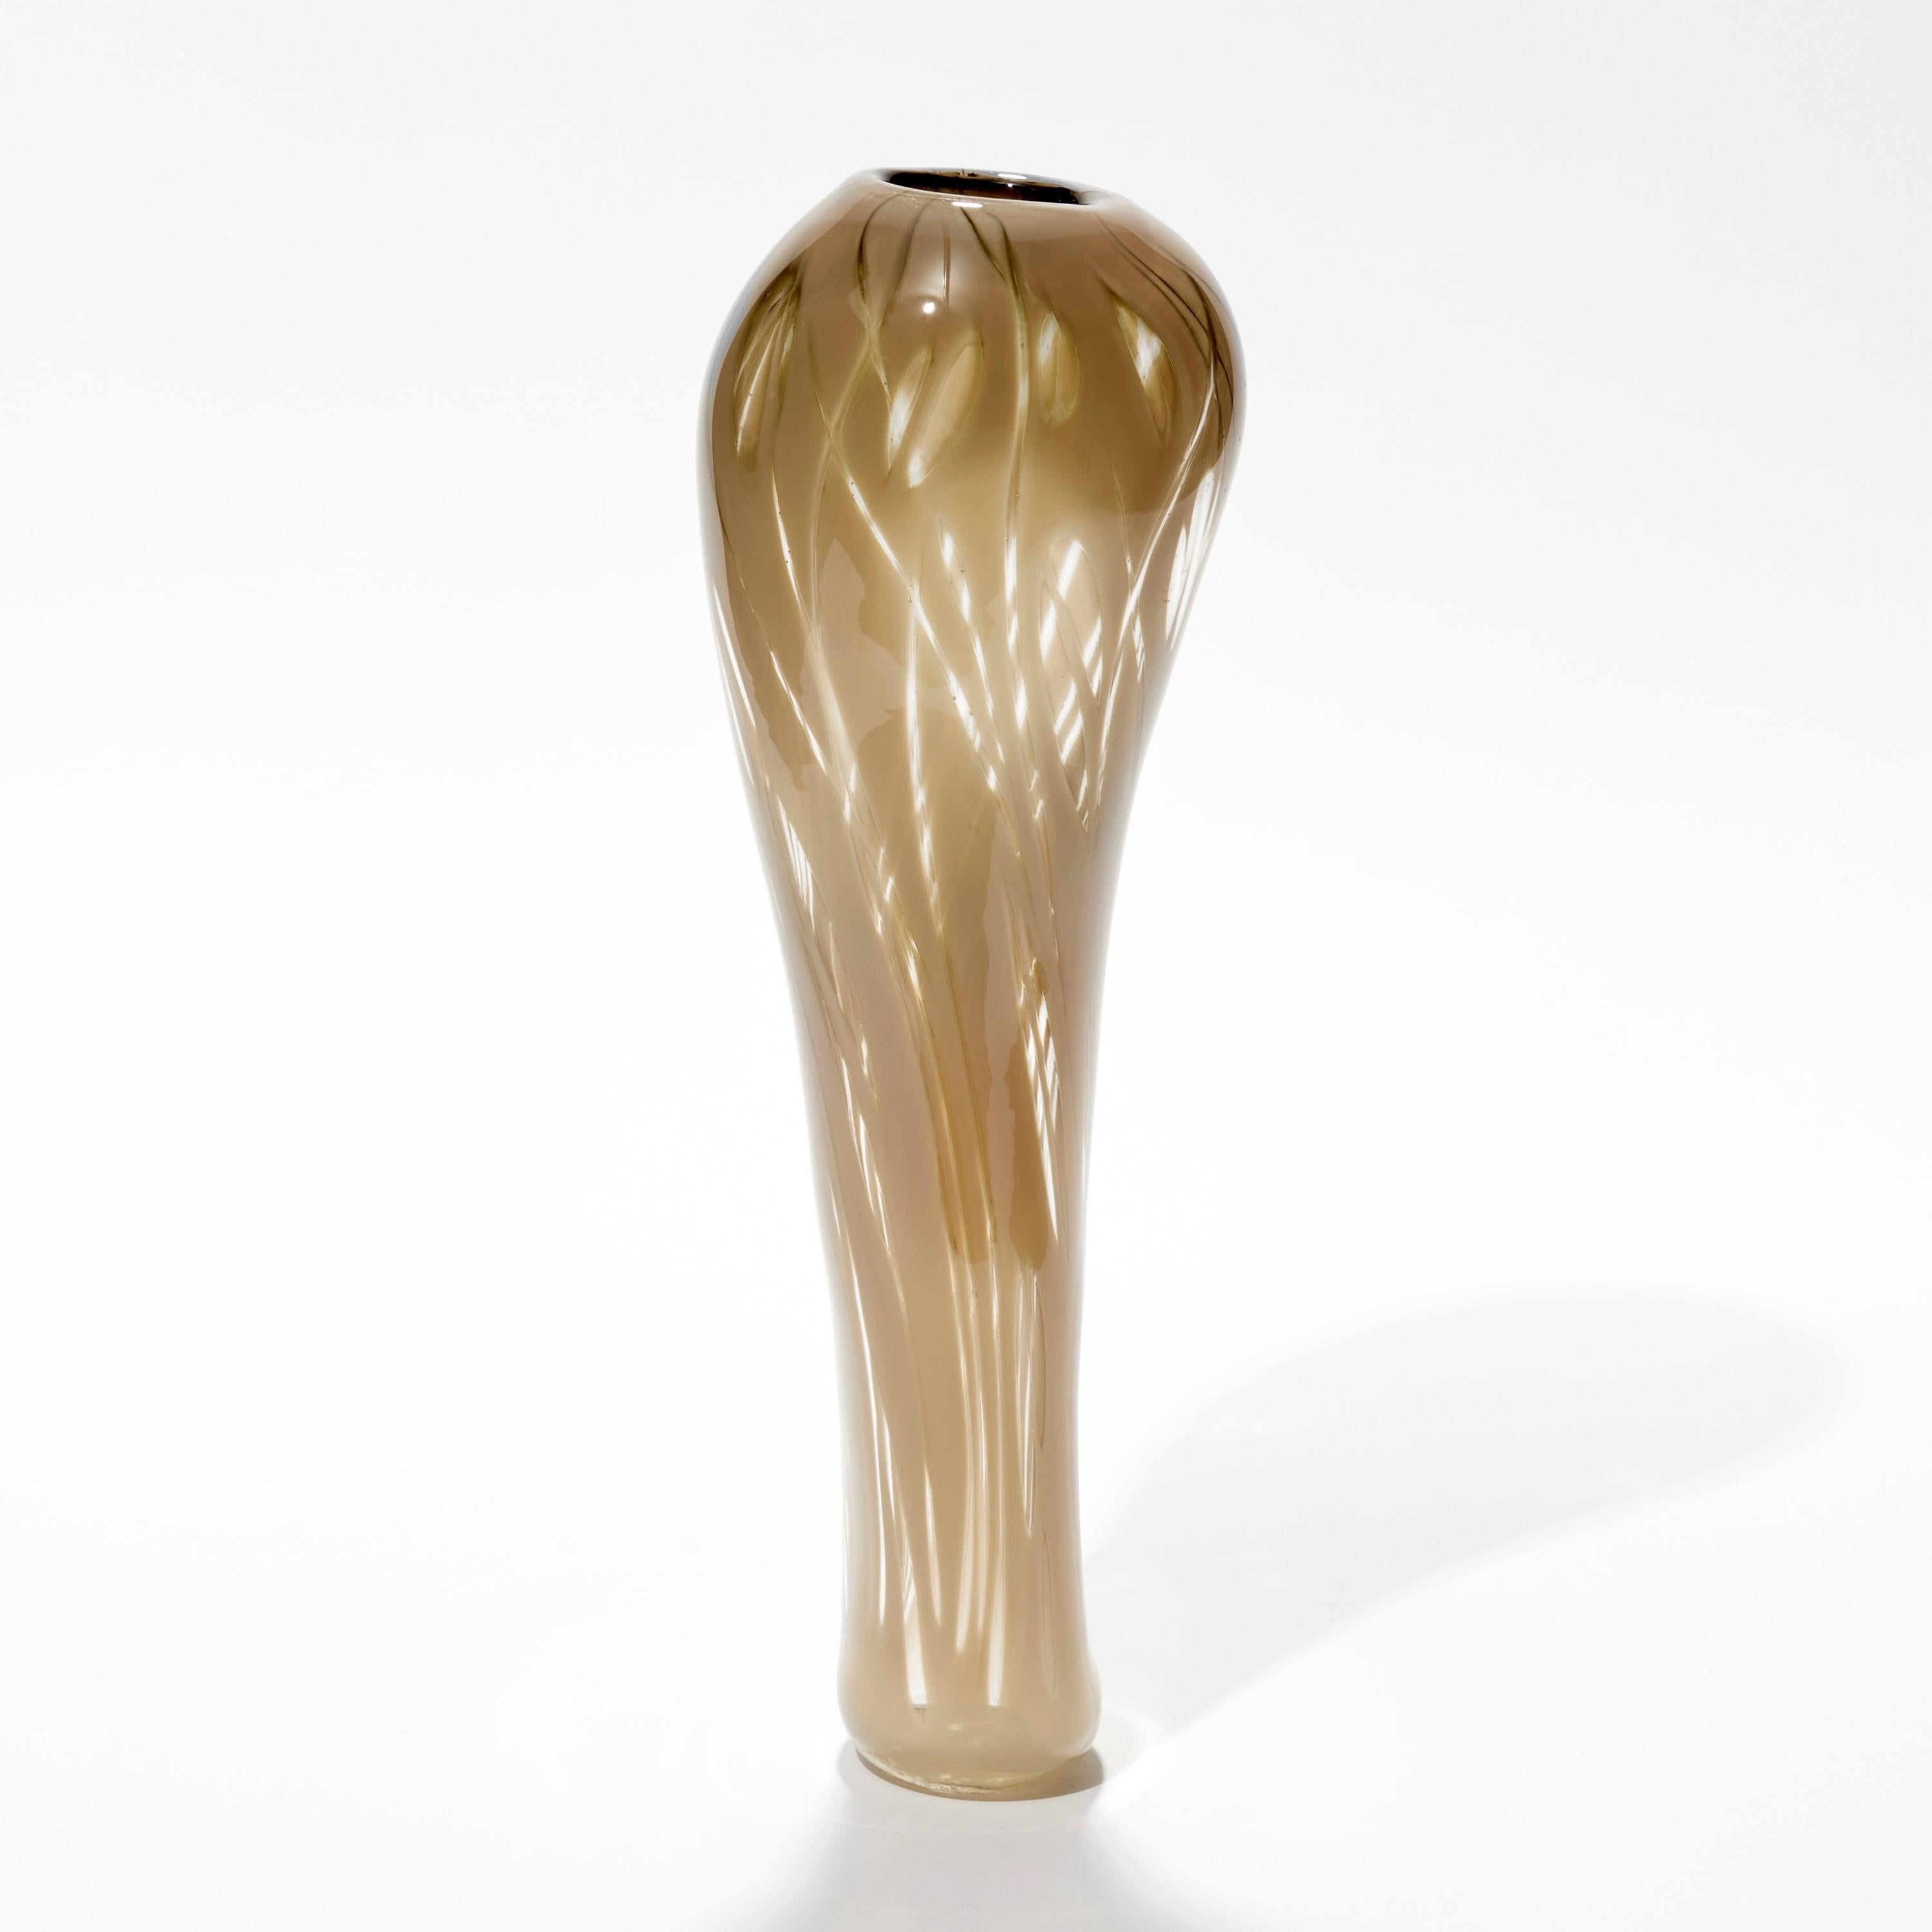 Organic Modern Cotinus I, a Fawn / Nude / Beige Sculptural Hand Blown Vase by Michèle Oberdieck For Sale